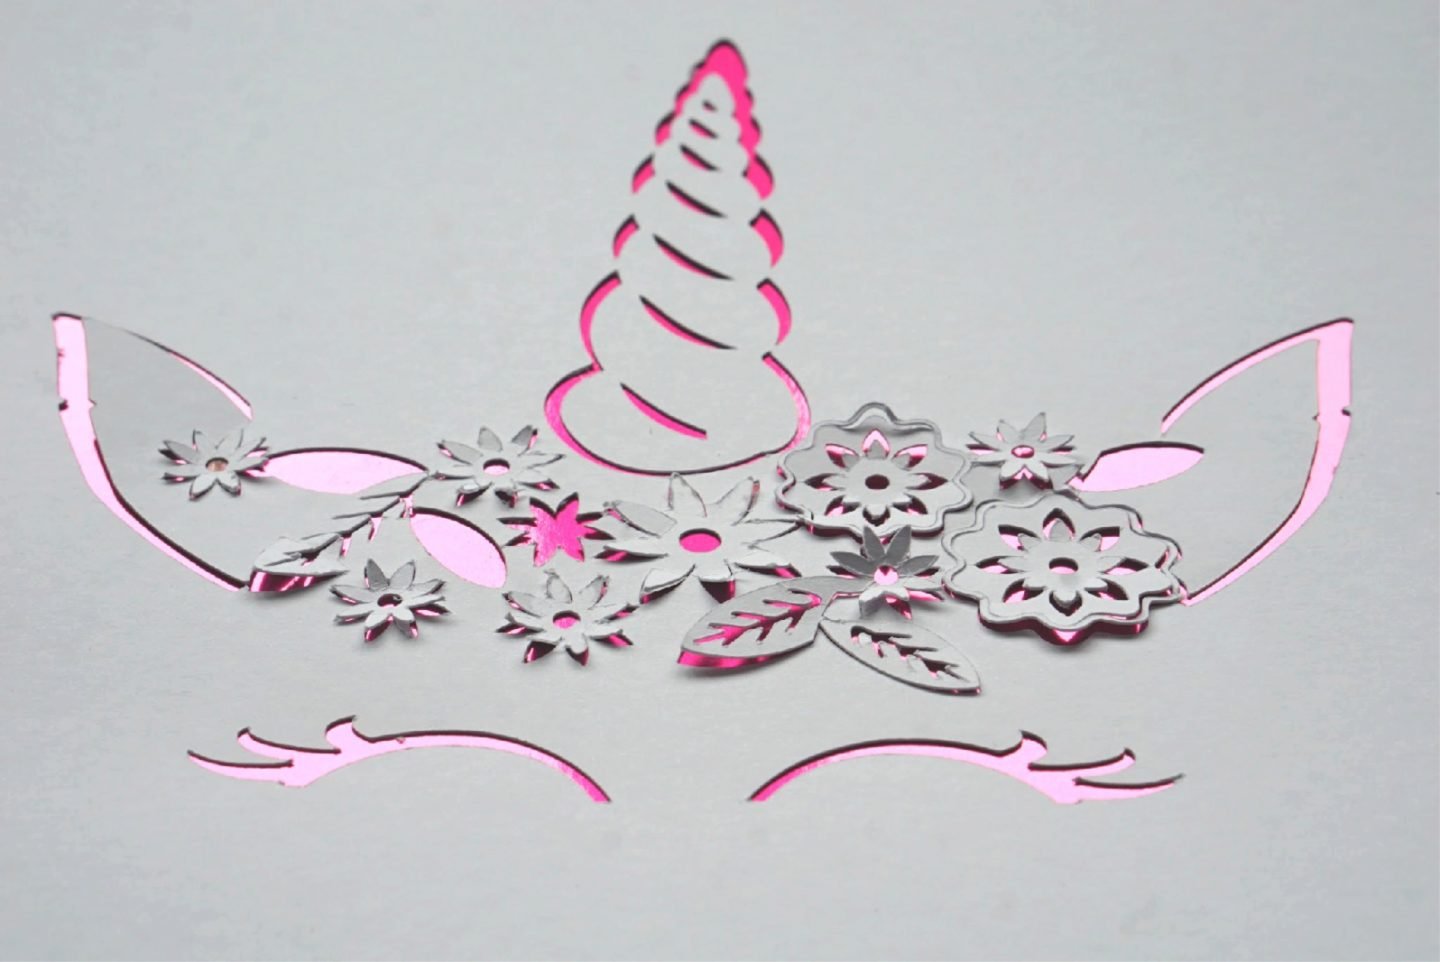 How to make a Unicorn Paper Cut With The Cricut Maker www.extraordinarychaos.com